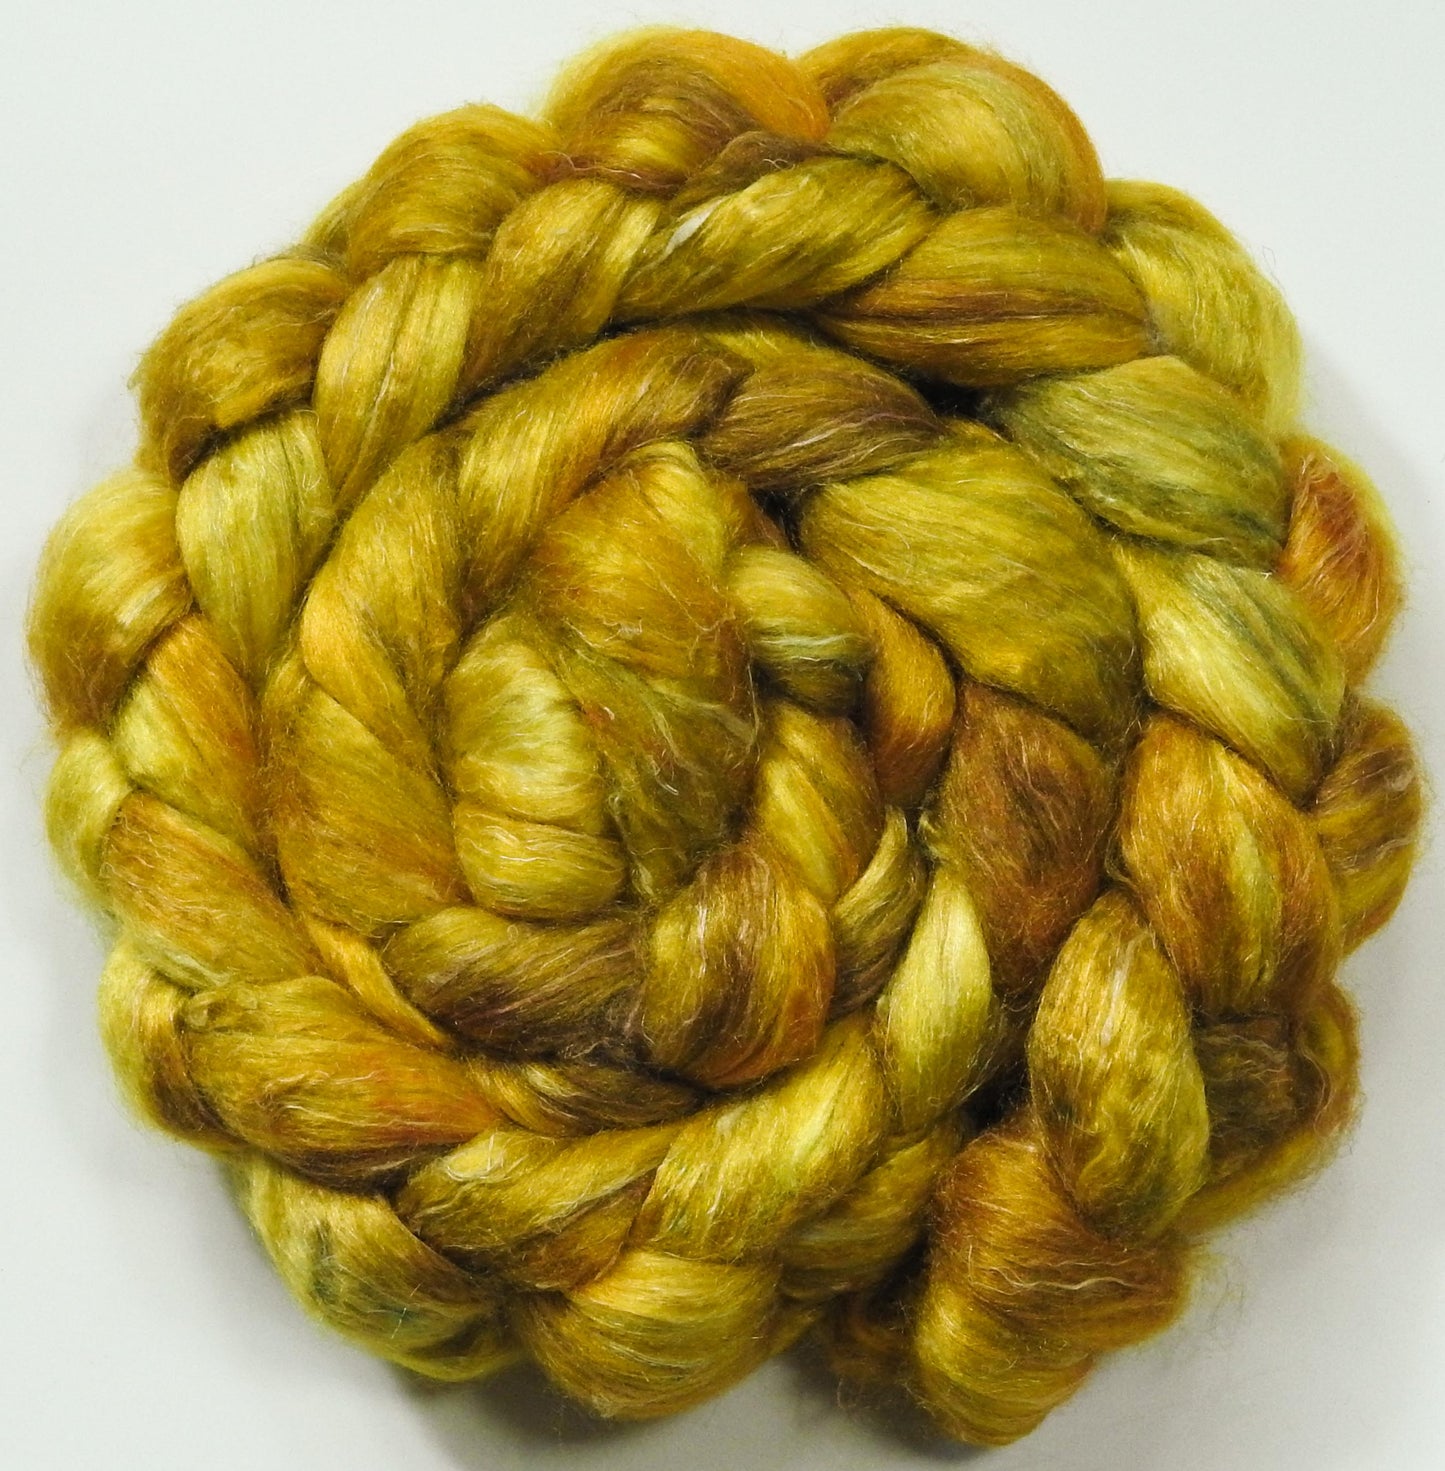 Coreopsis - Glazed Solid - Tussah Silk / flax roving (65/35)